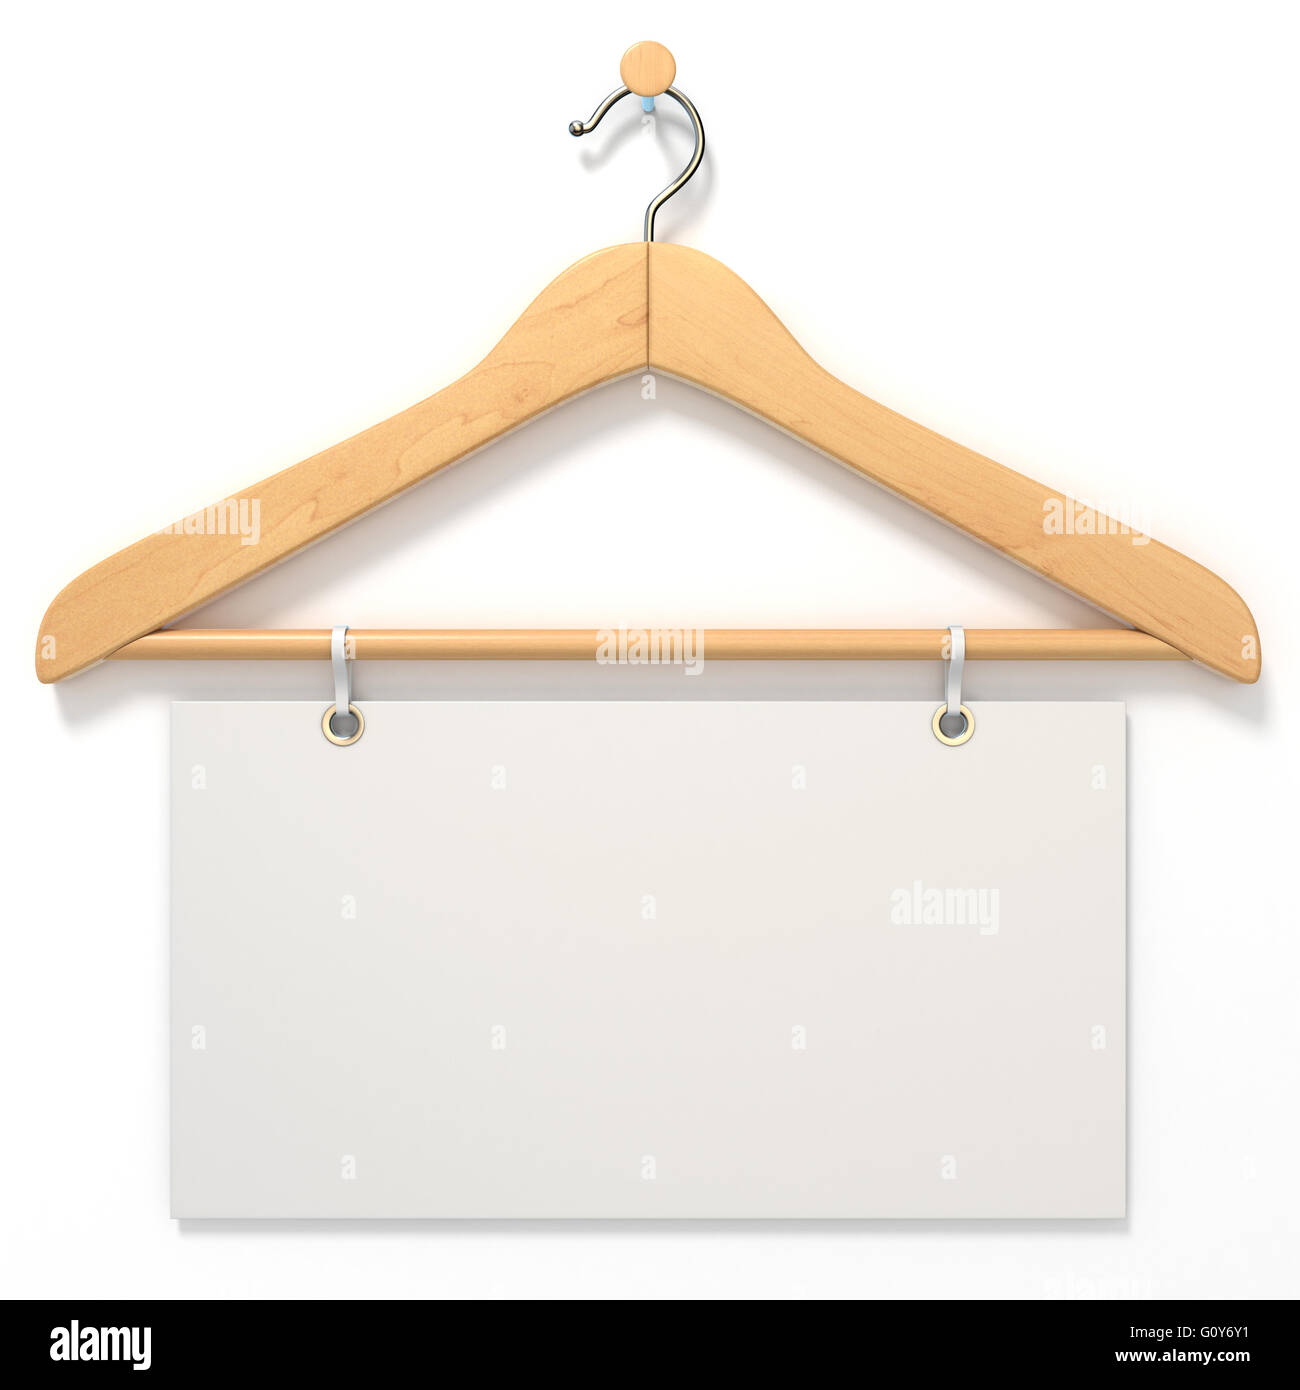 Wooden hanger with blank tag. 3D render illustration isolated on white background Stock Photo